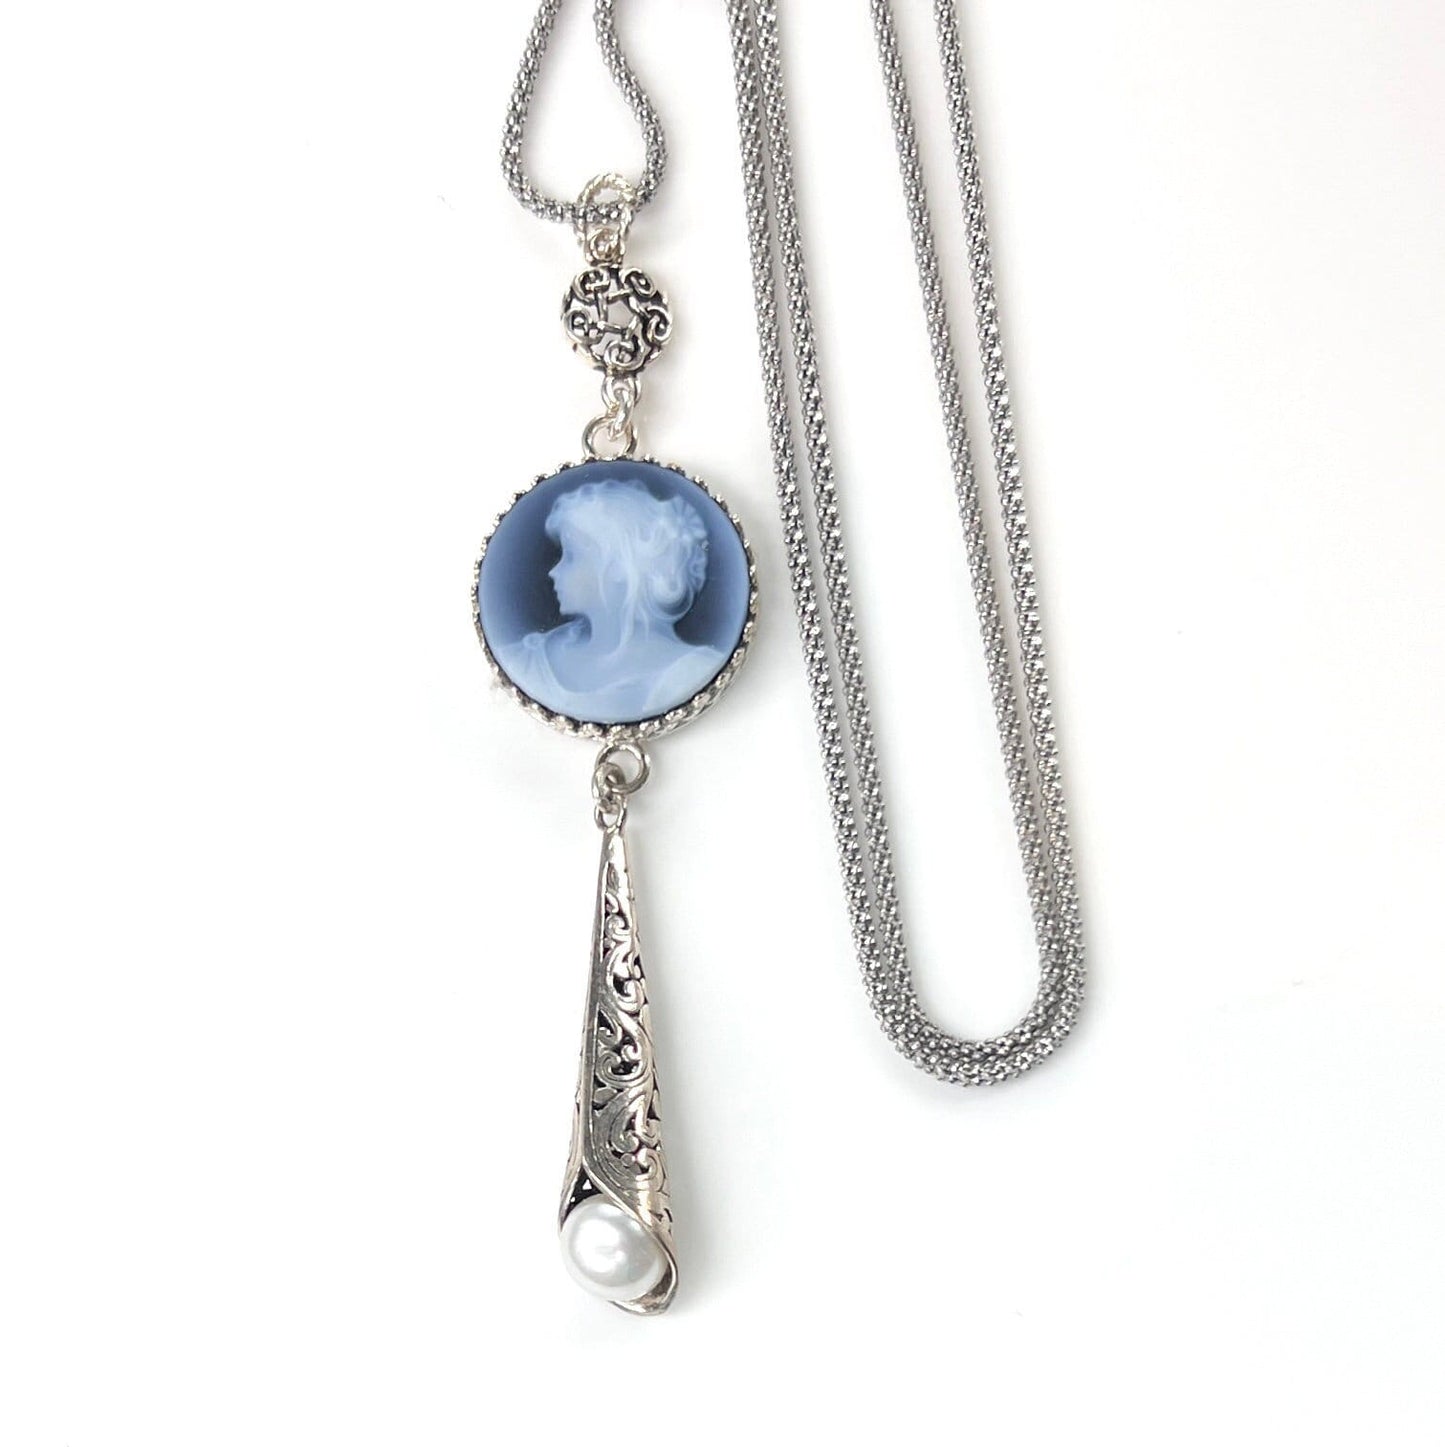 Adjustable Gemstone Cameo Long Necklace, Victorian Woman, Blue Cameo Jewelry, Sterling Silver, Unique Gifts for Wife, Pearl Drop Necklace